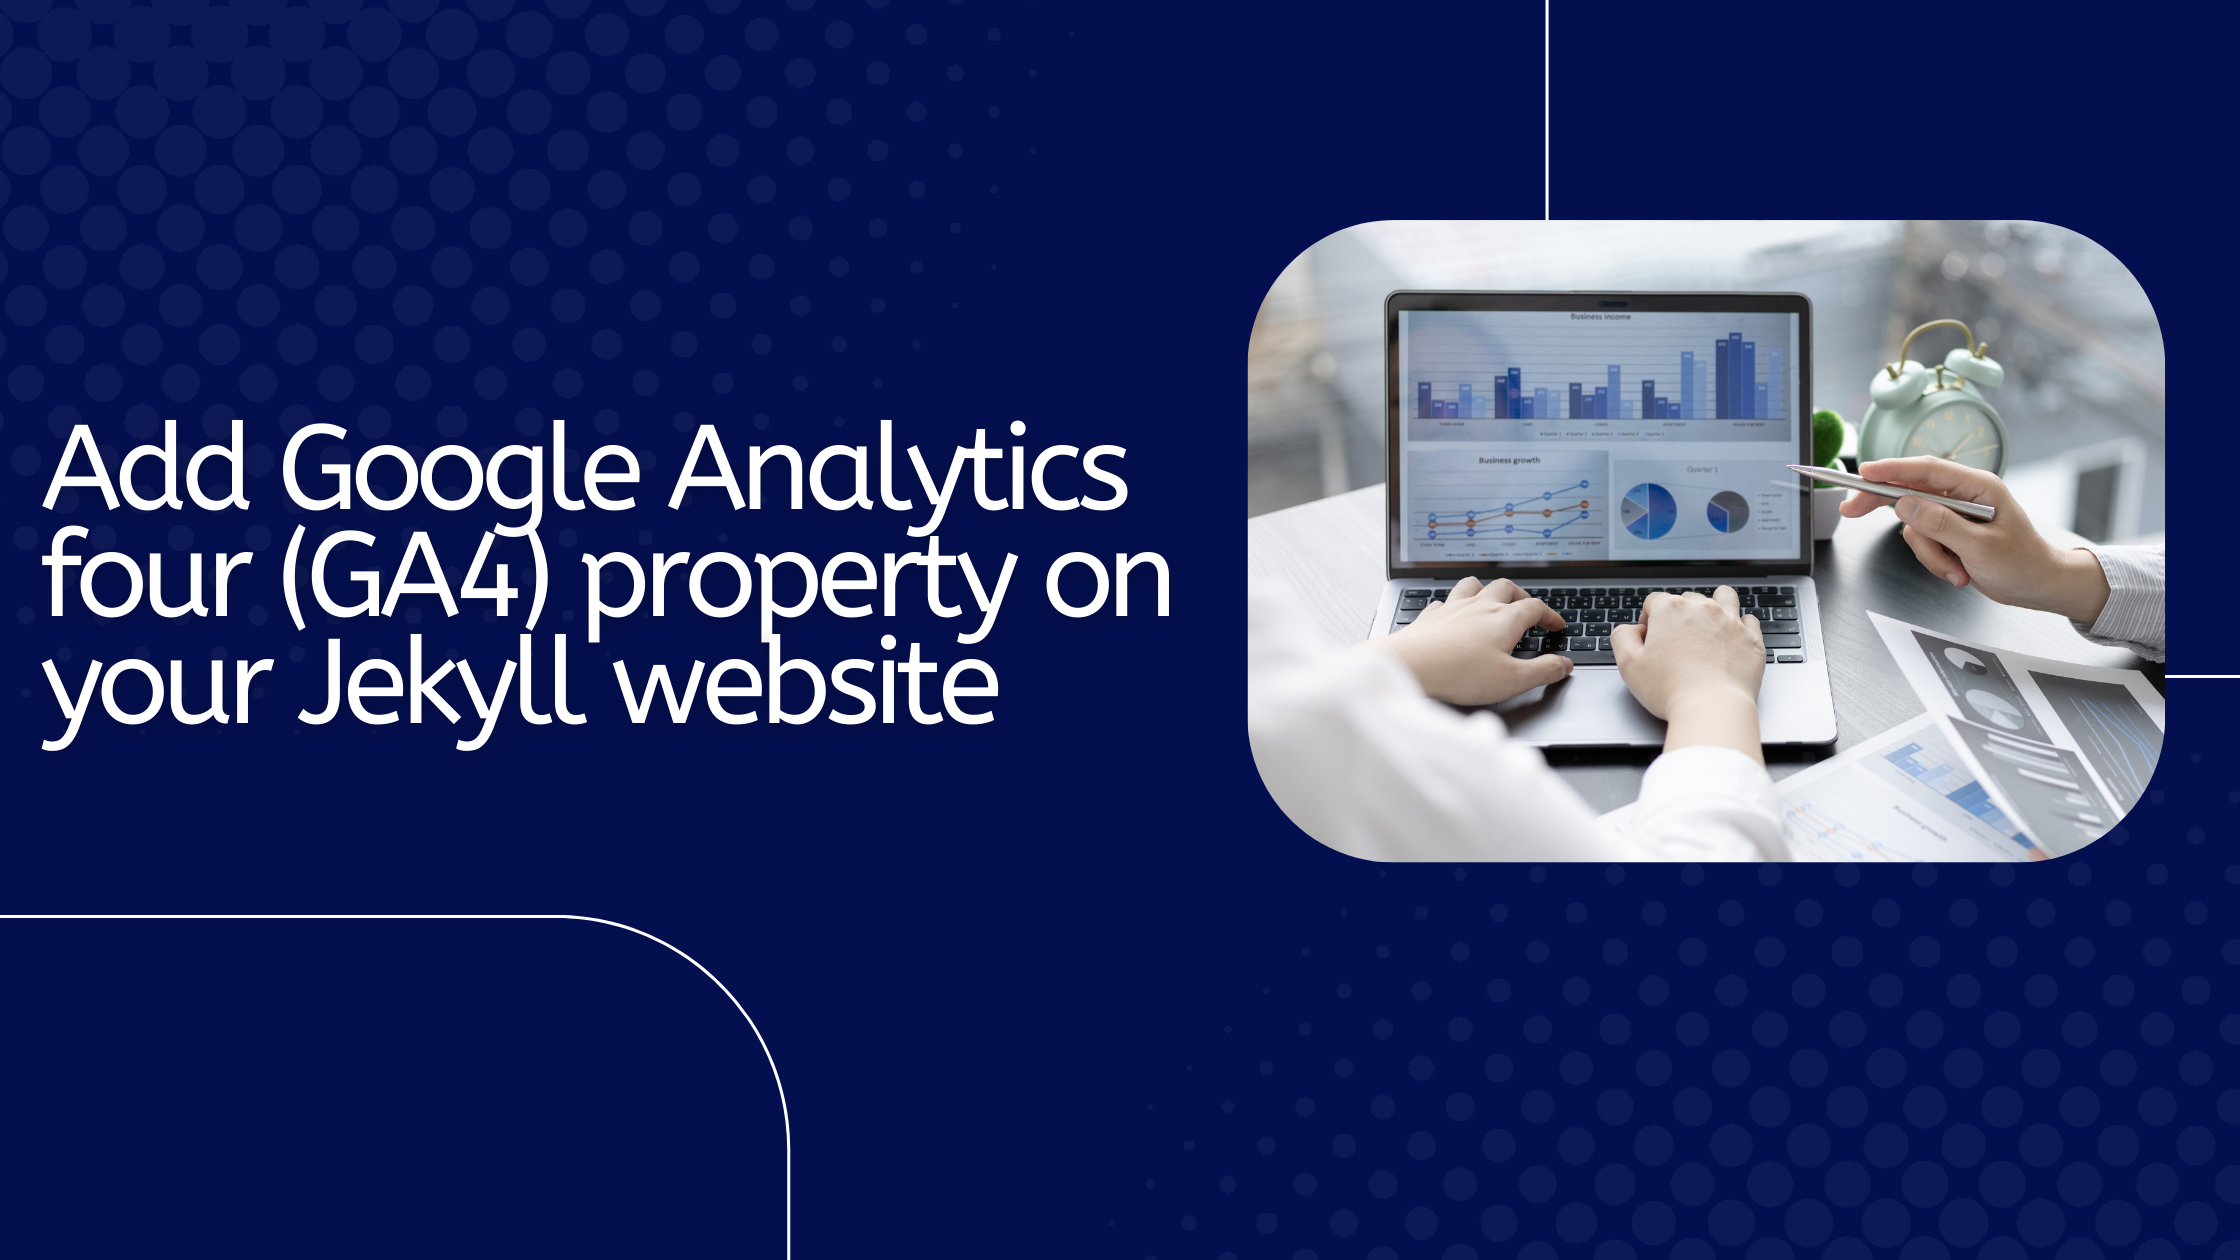 How to implement Google Analytics four (GA4) property on your Jekyll wesbsite?